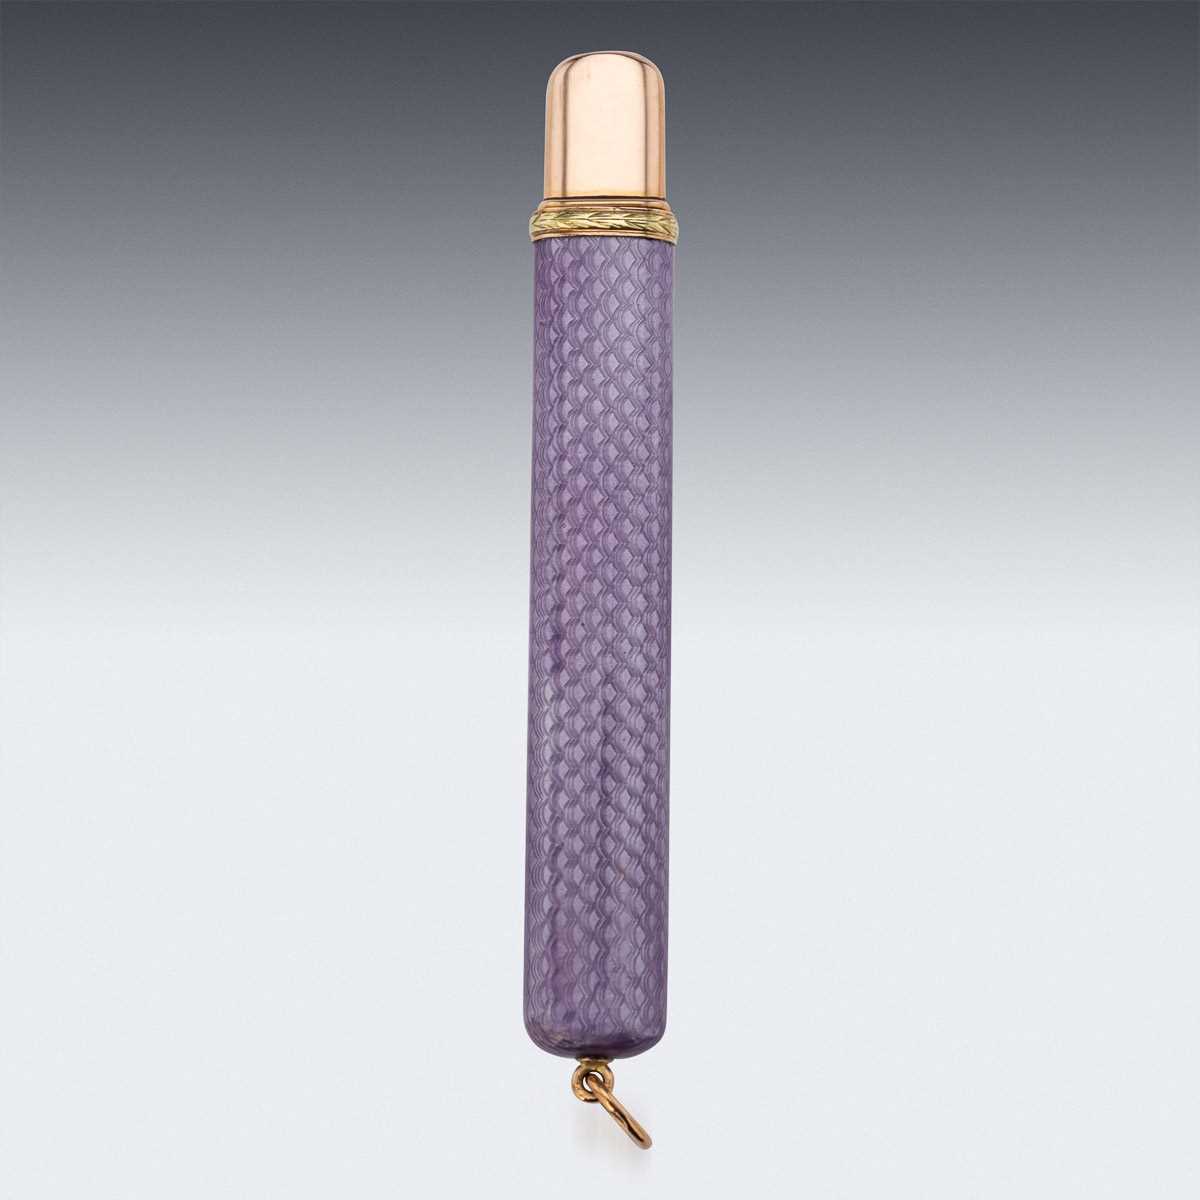 FABERGE: AN EARLY 20TH CENTURY GOLD MOUNTED ENAMEL PENCIL, ALDER, C. 1910 - Image 3 of 10